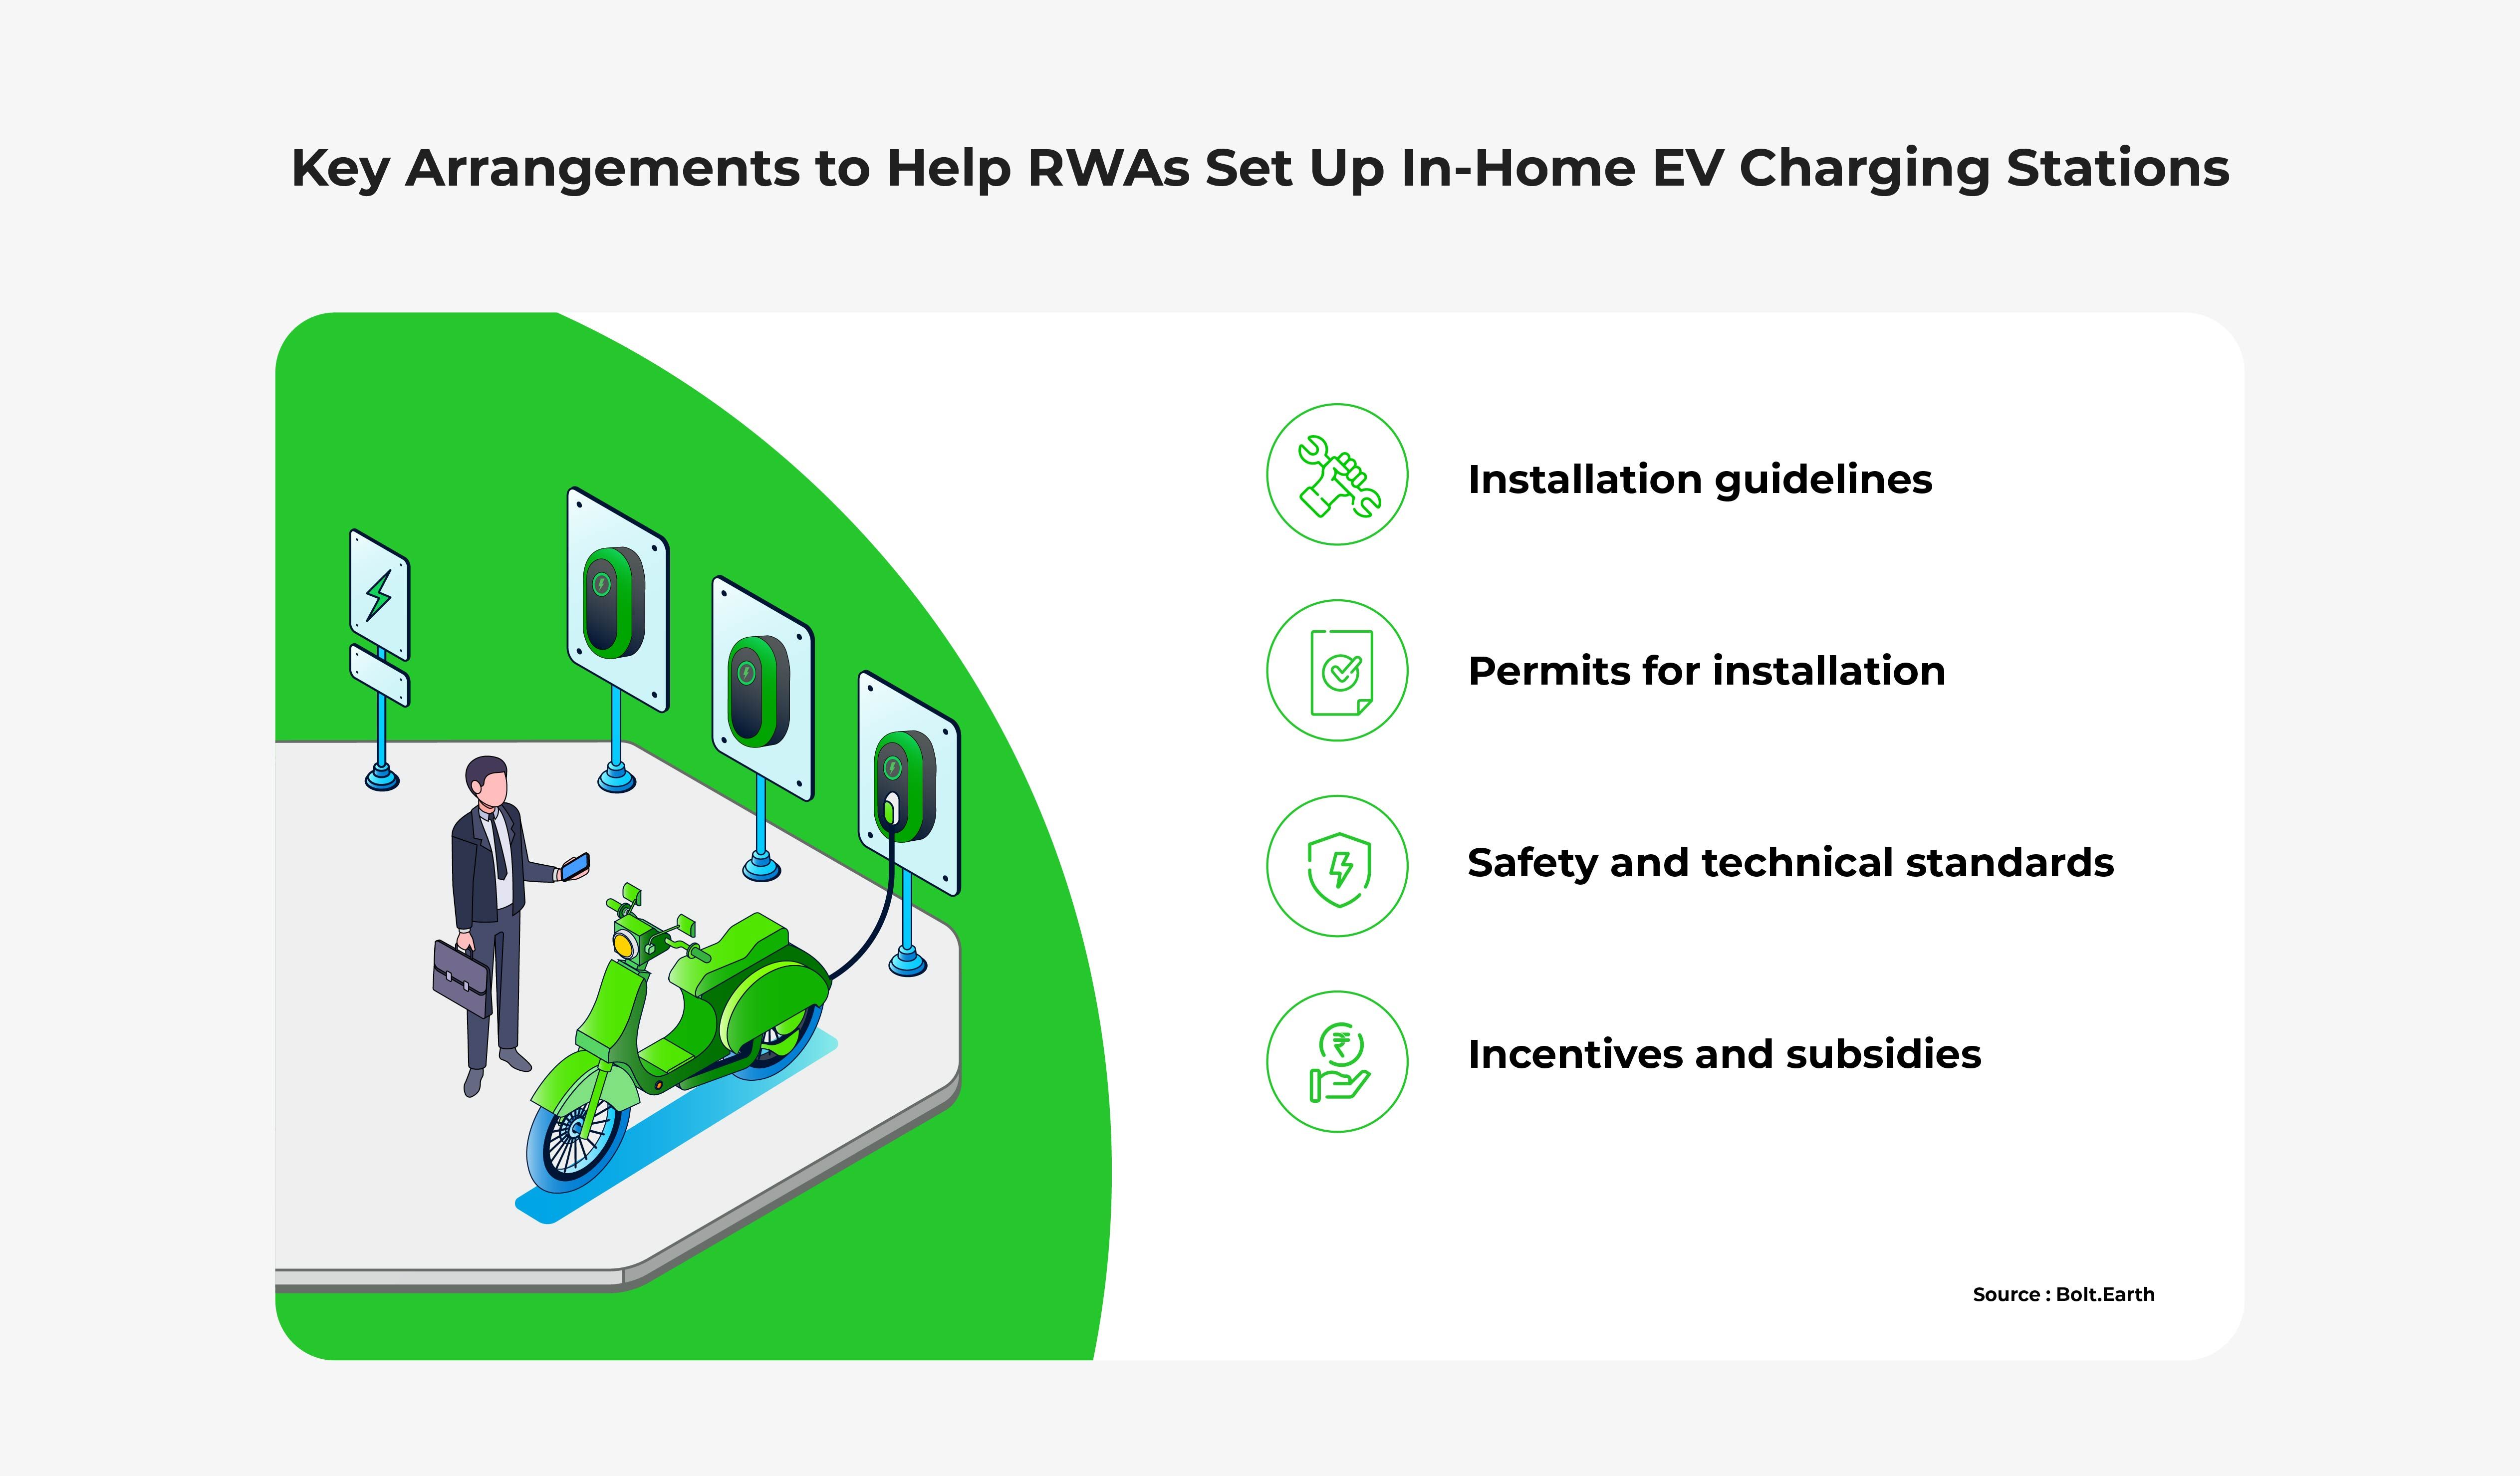 Drawing of the 4 key arrangements to help RWAs set up in-home EV charging stations: installation guidelines, permits for installation, safety and technical standards, incentives and subsidies.